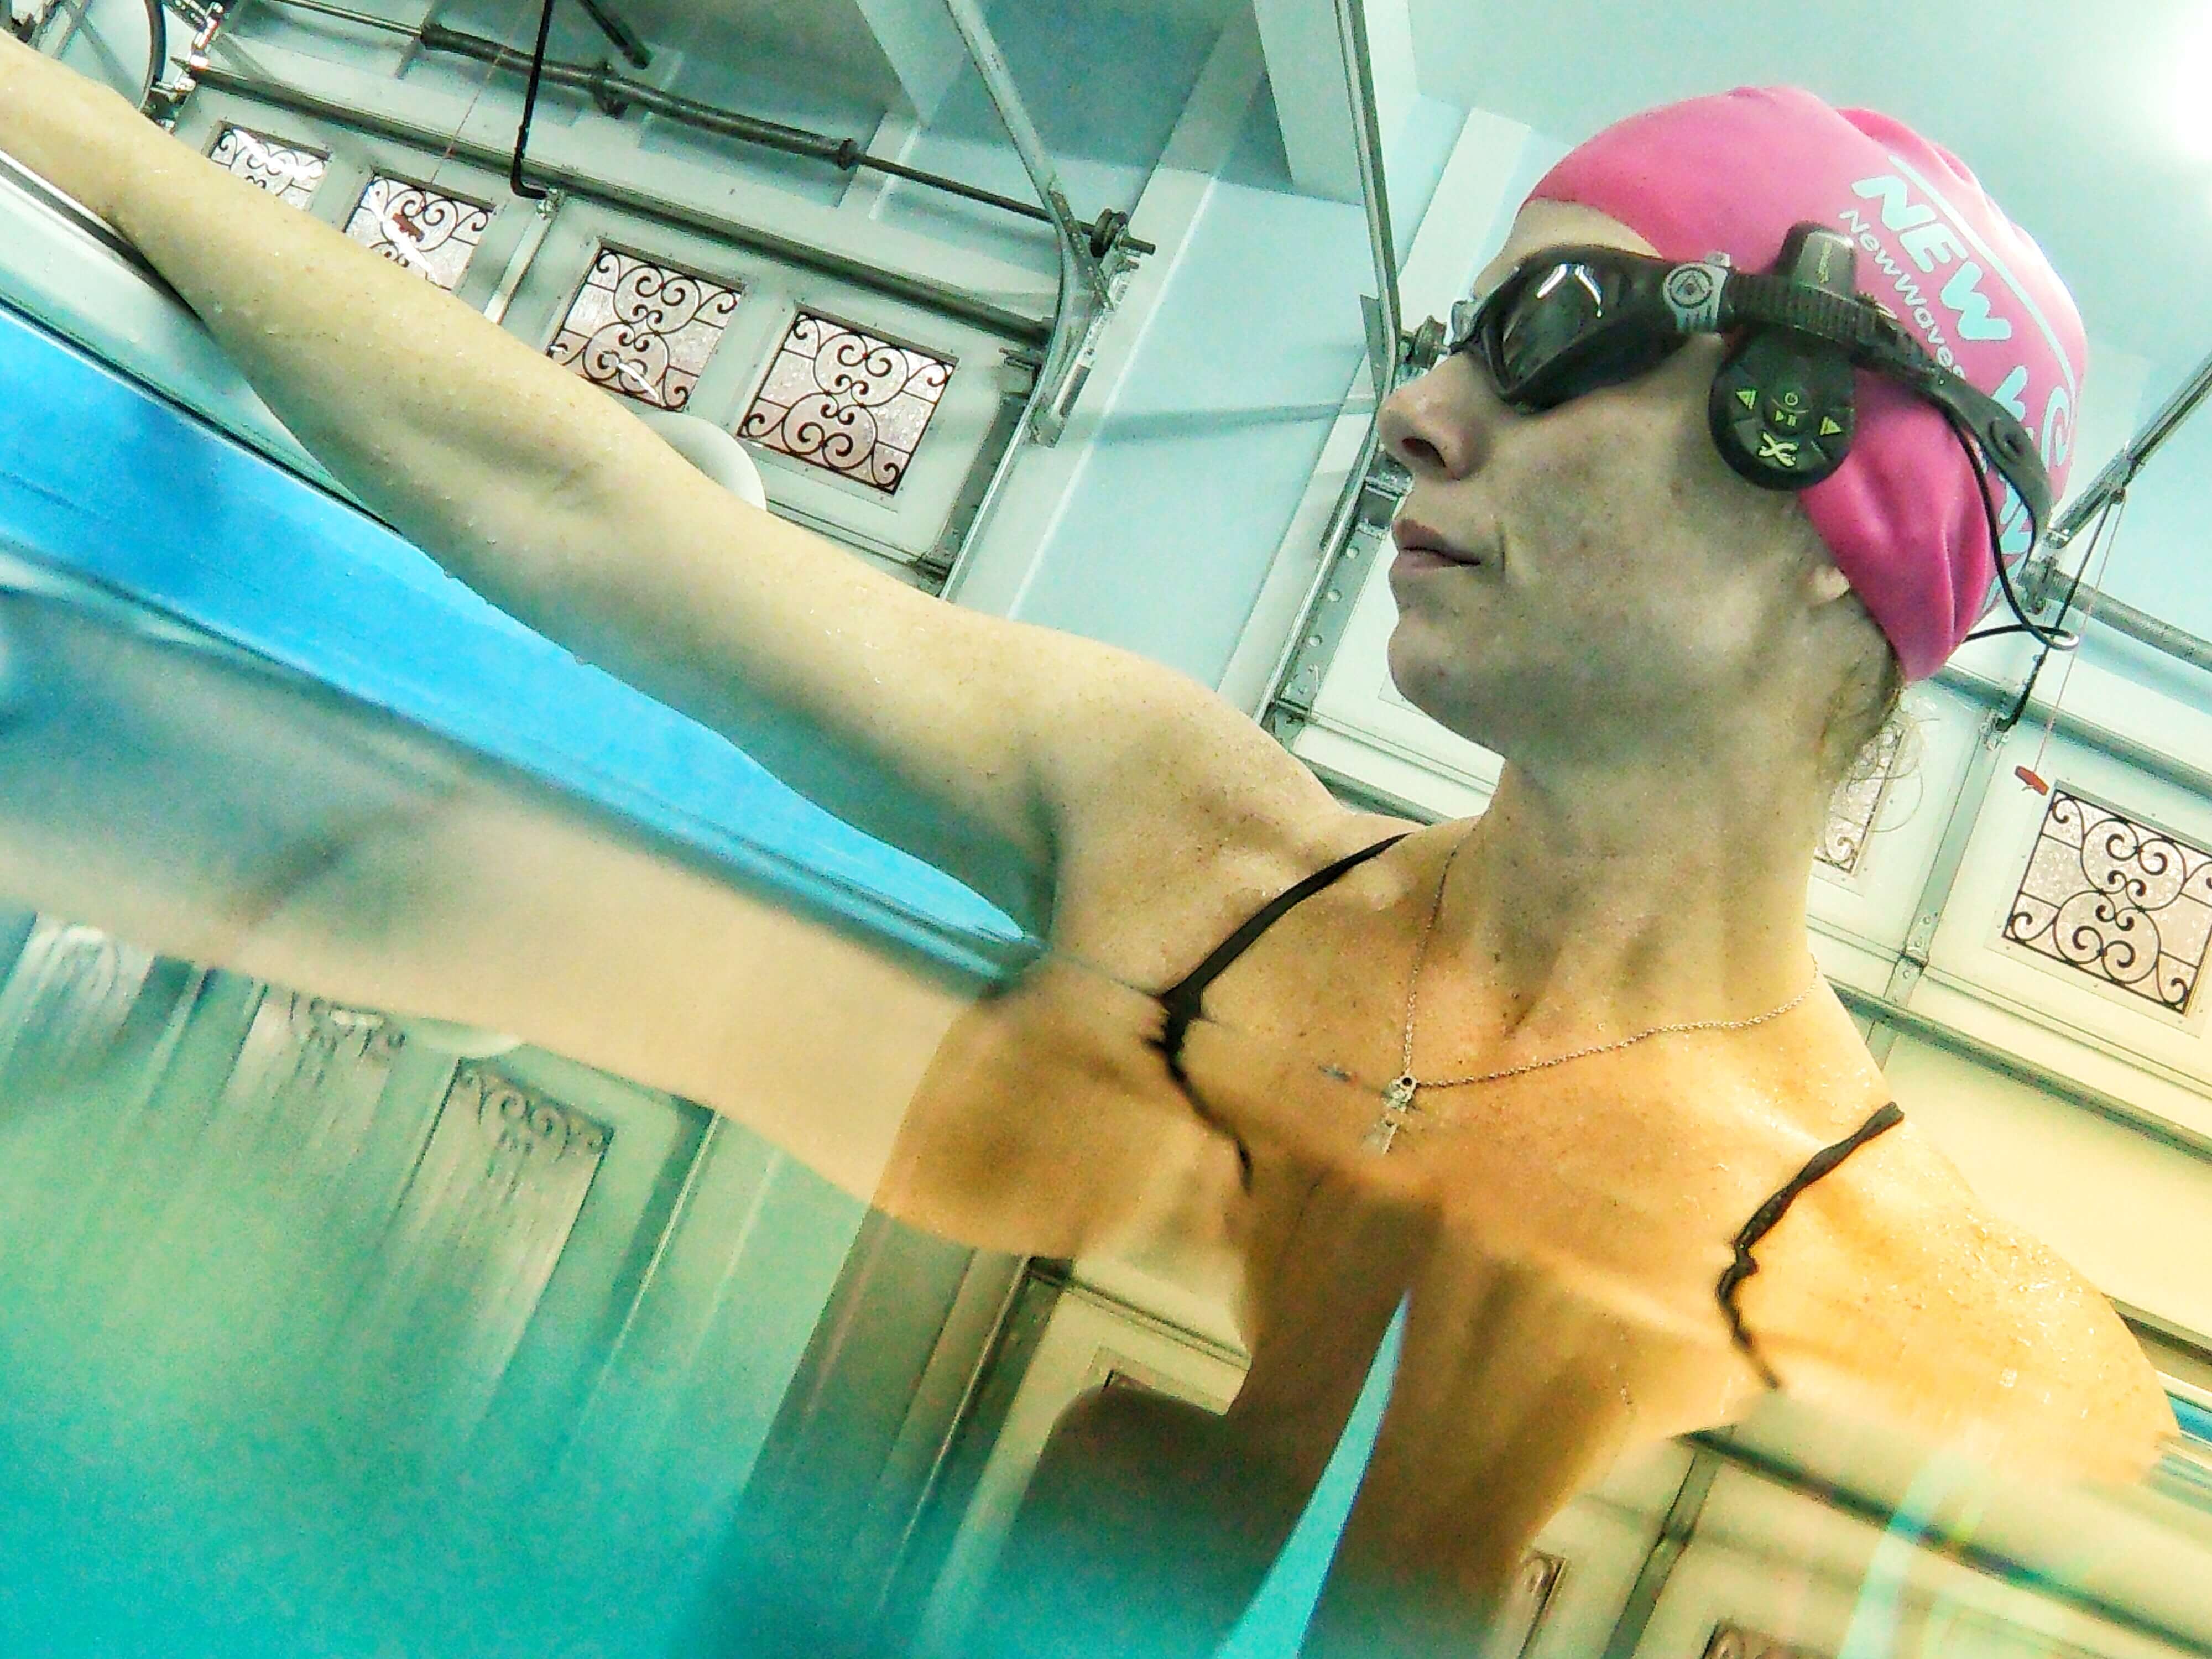 Triathlete, fitness coach, and working mom Melissa in the High Performance Endless Pools swimming machine in her garage